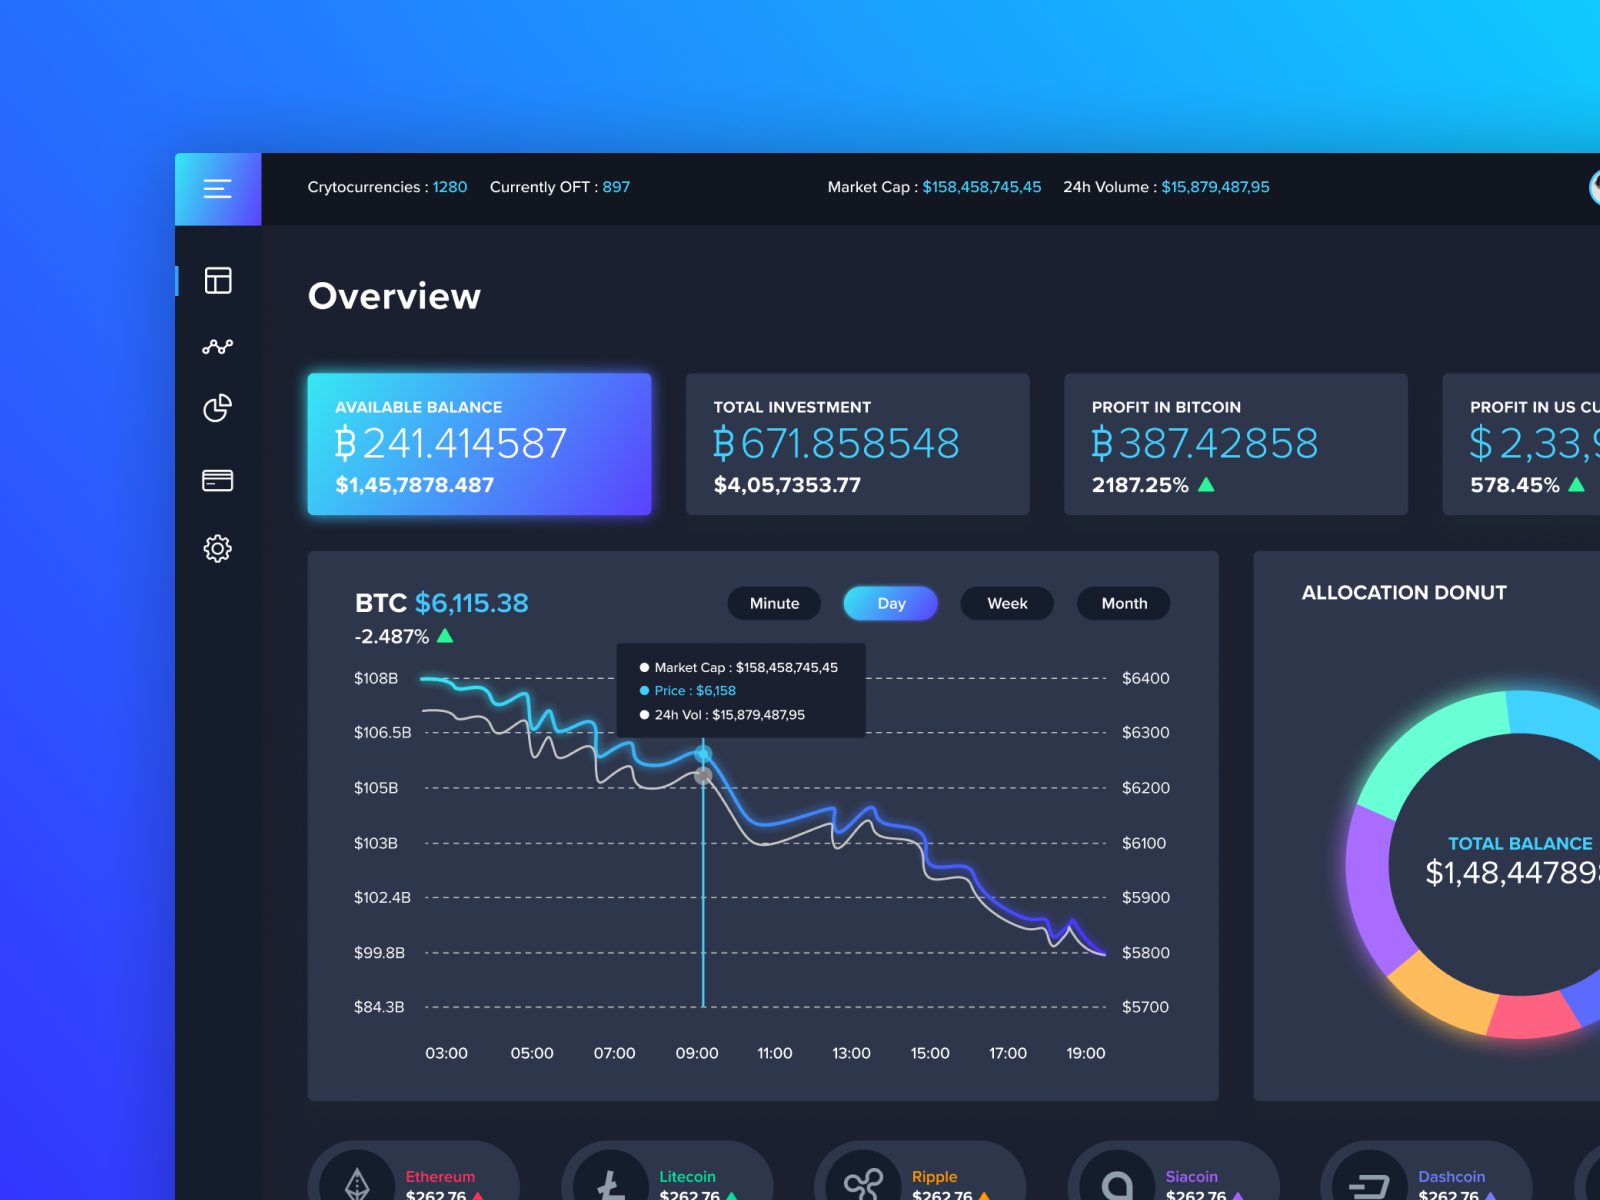 cryptocurrency dashboard design